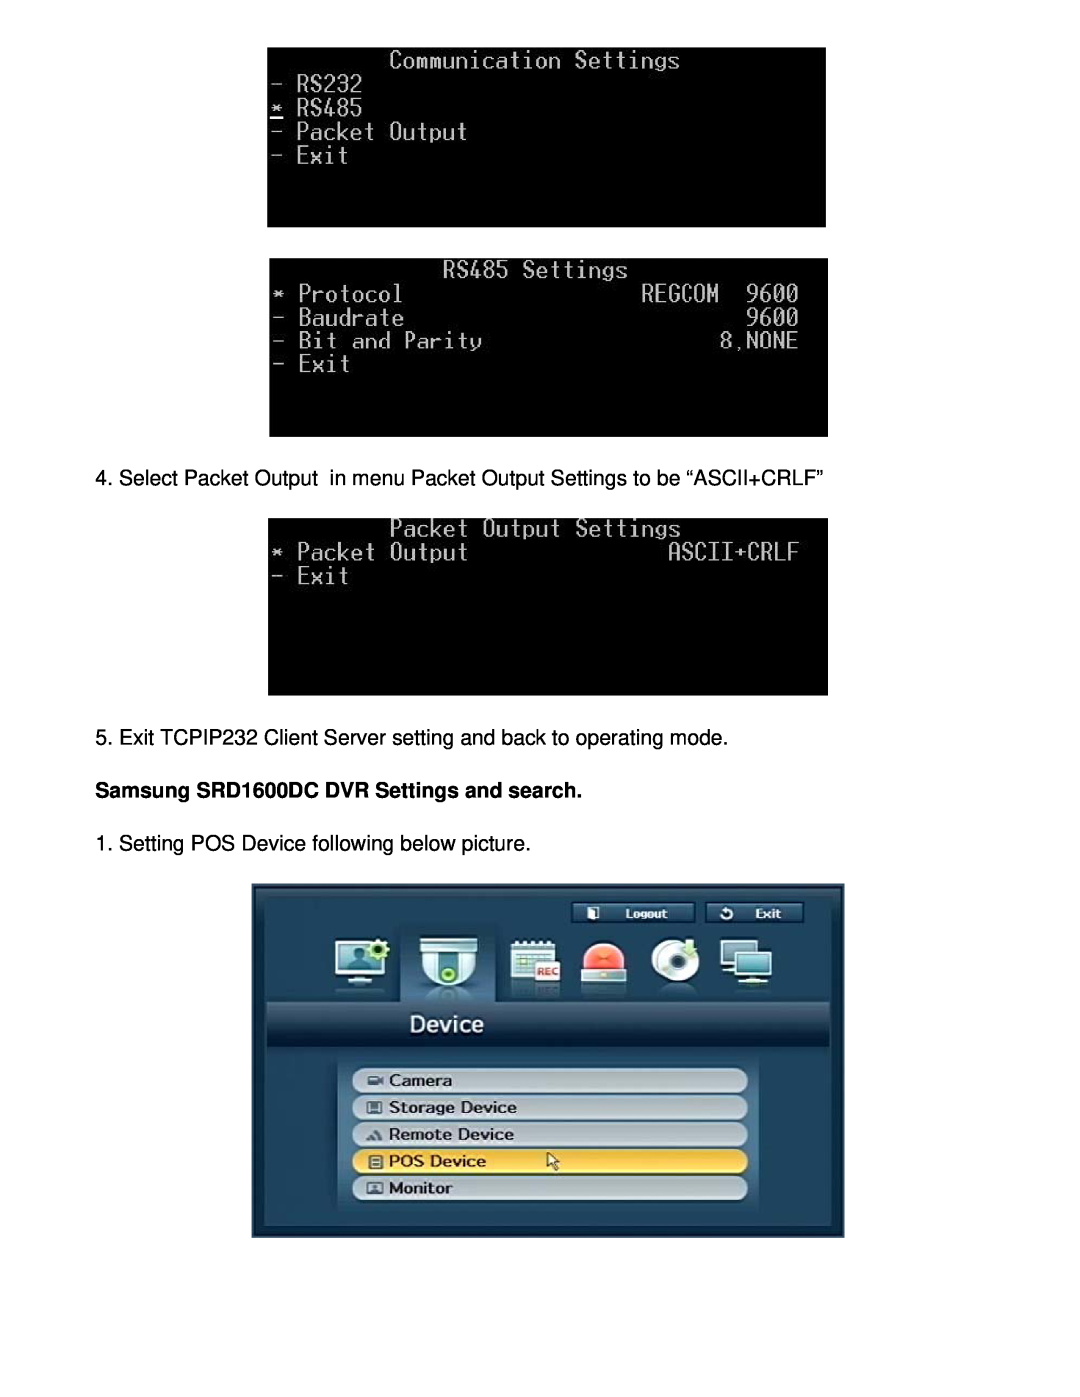 Samsung SRD-1670DC manual Exit TCPIP232 Client Server setting and back to operating mode 